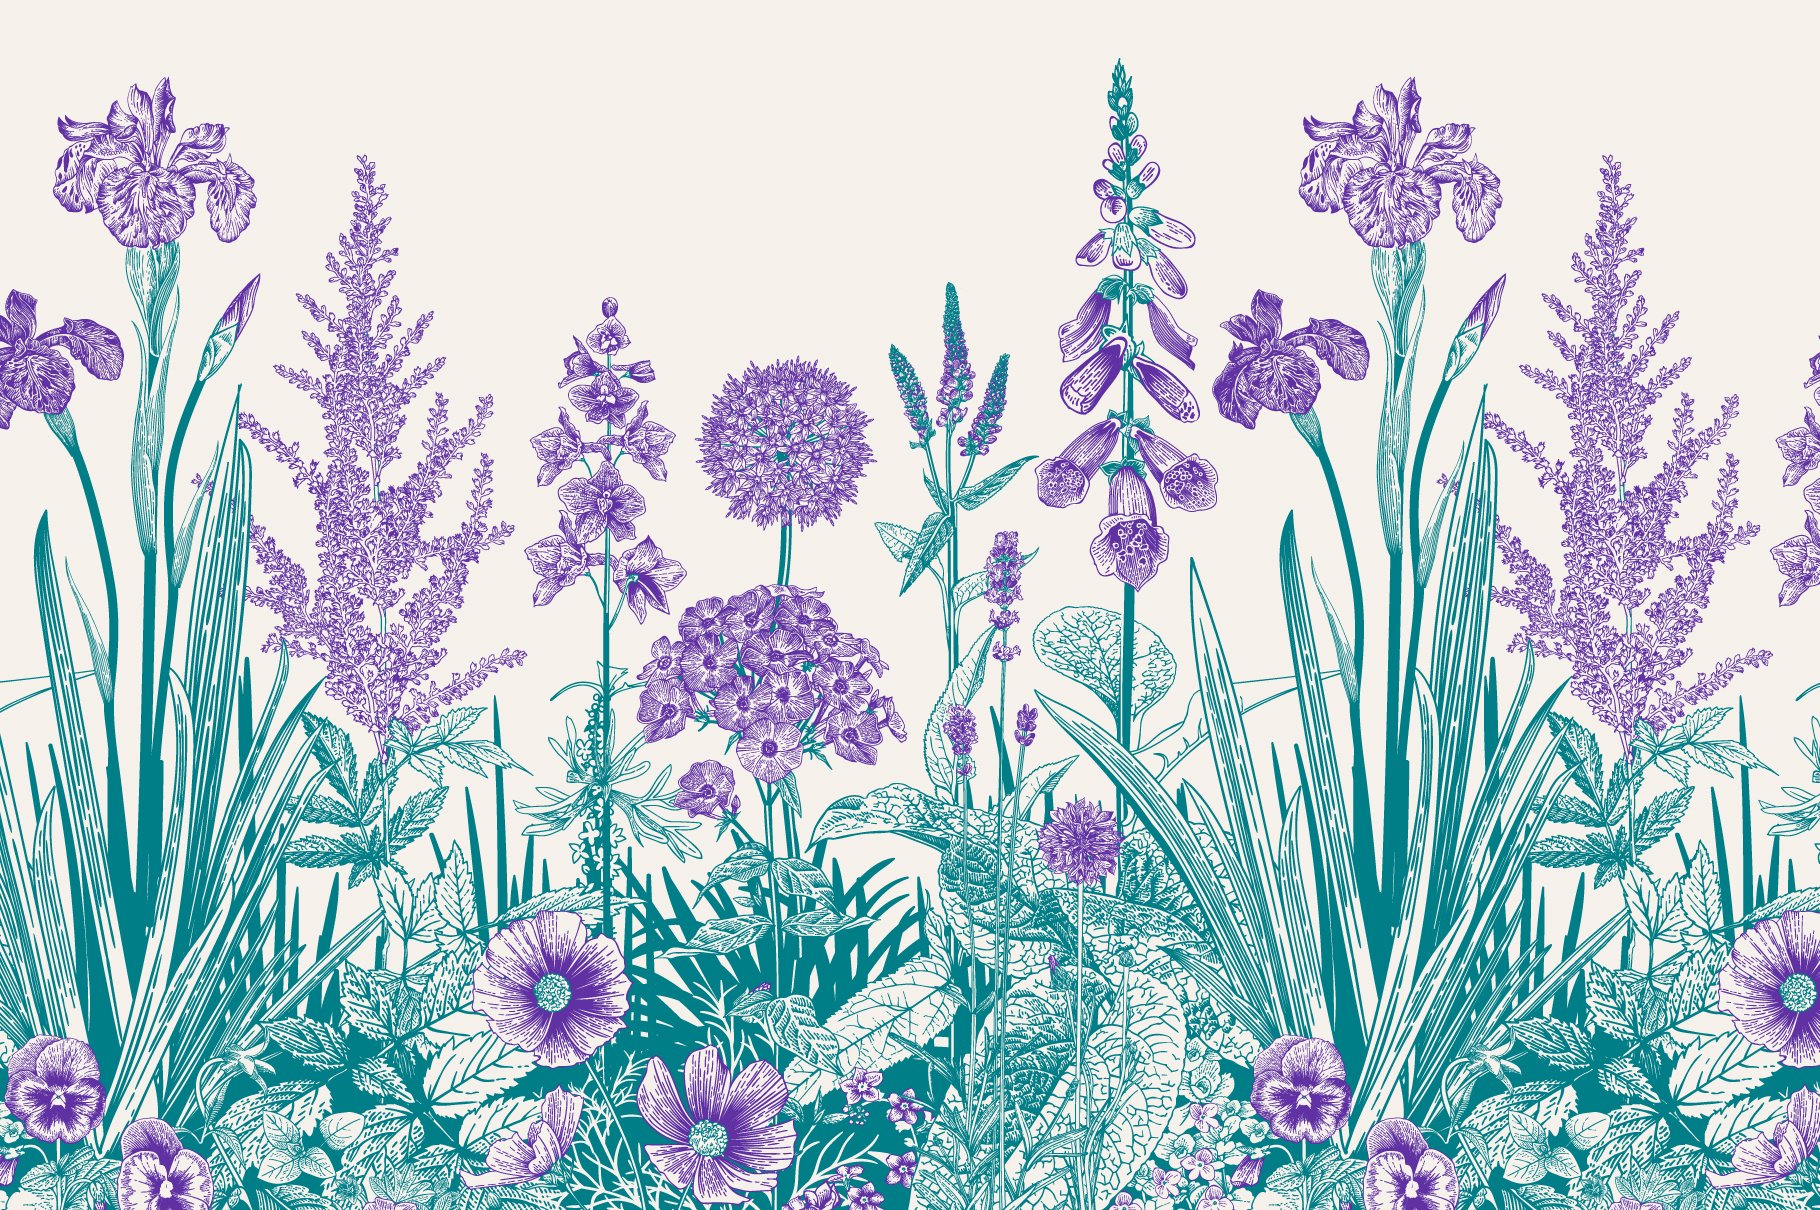 Full composition with purple flowers.